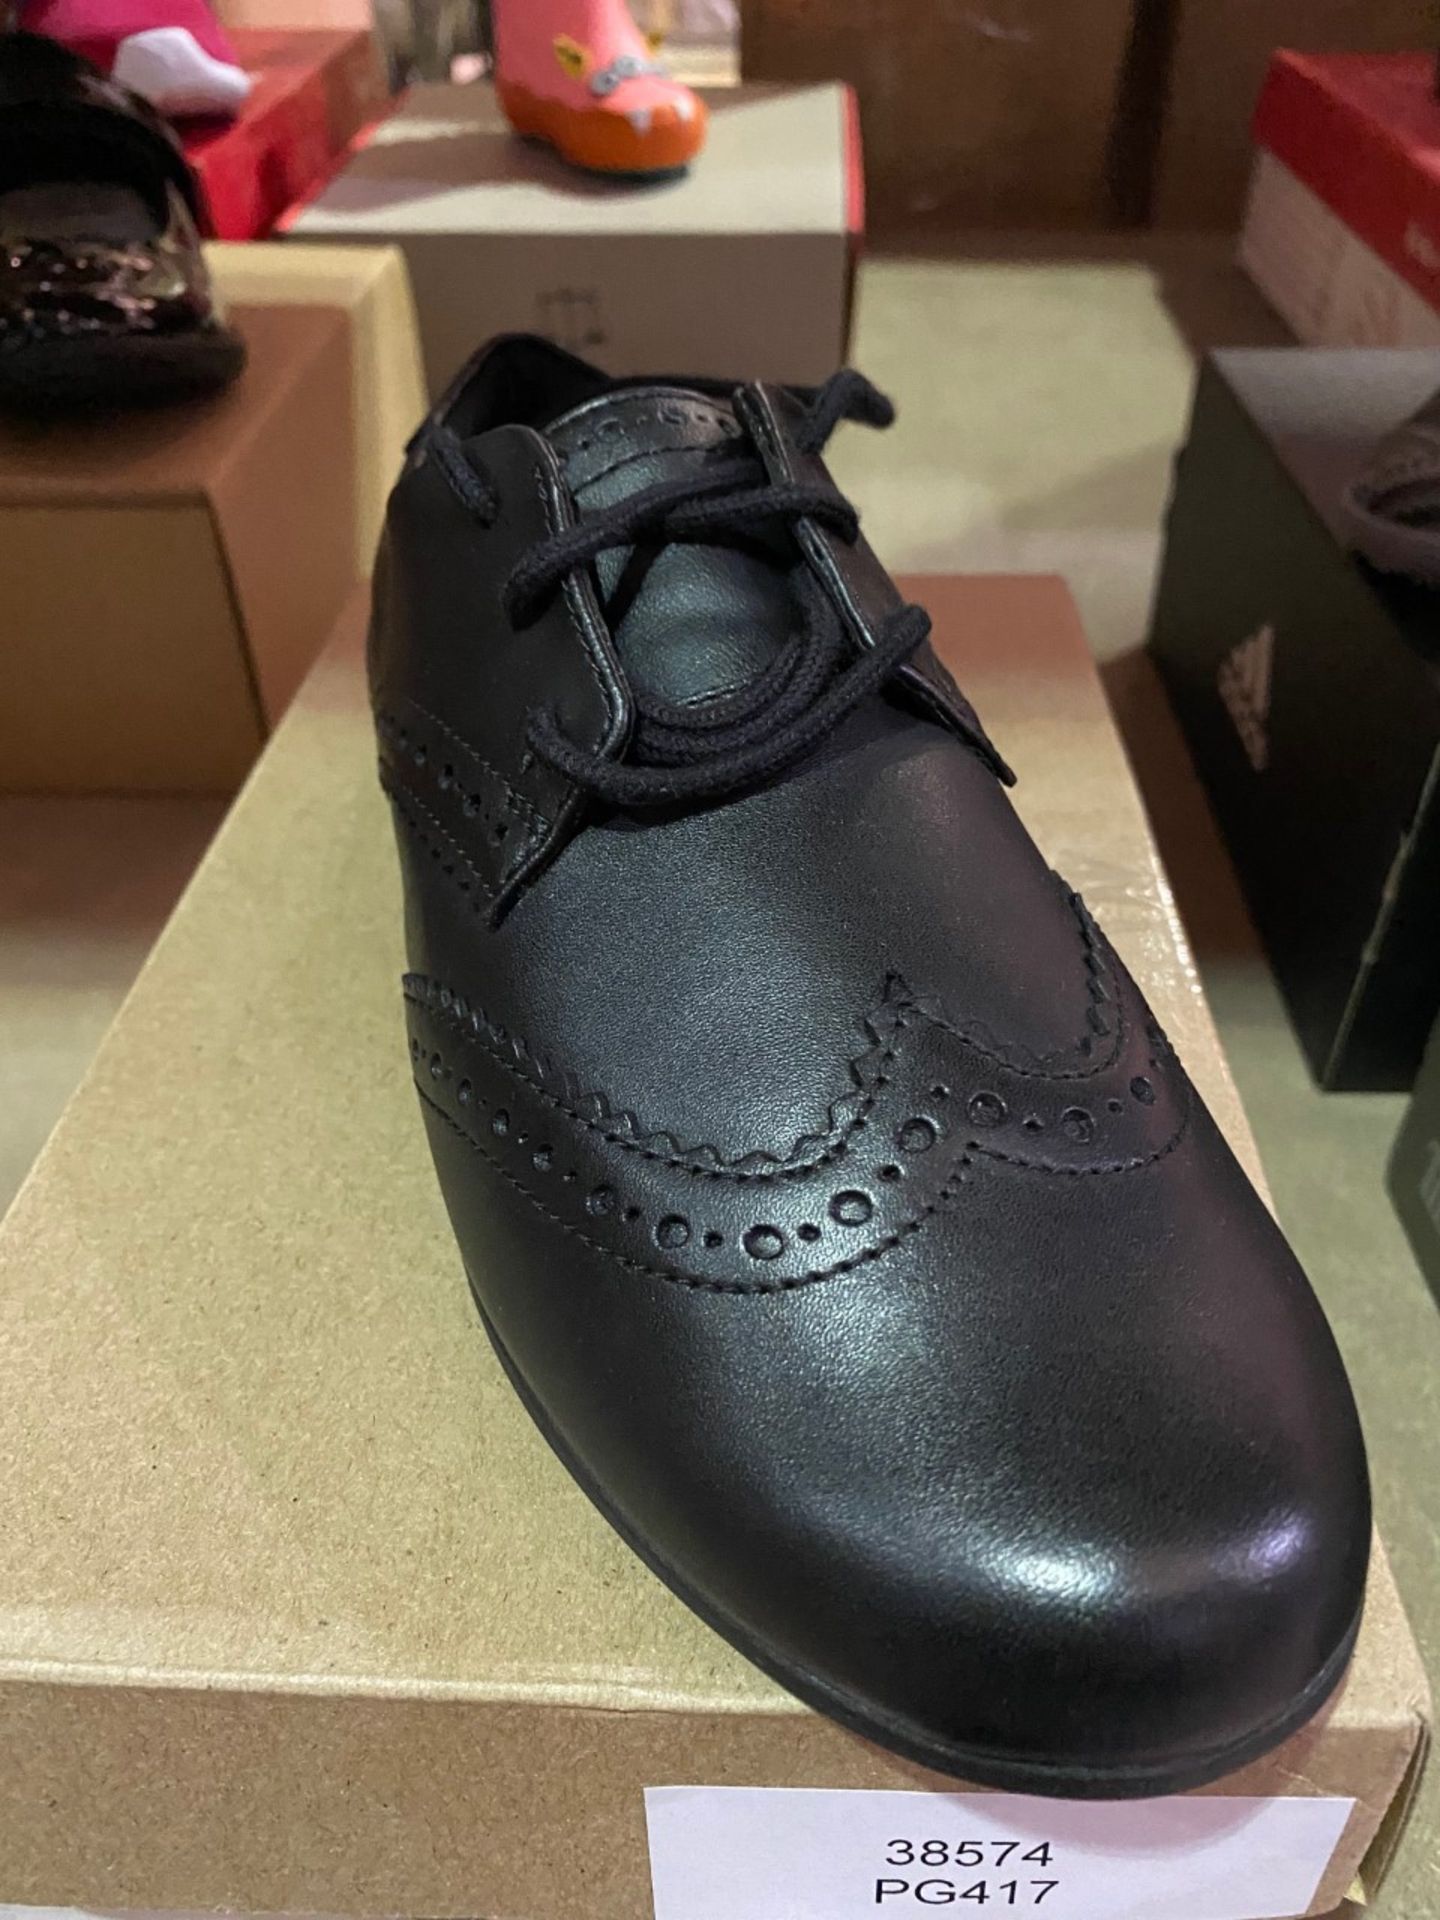 NEW & BOXED CLARKS BLACK FORMAL SHOE SIZE JUNIOR 3